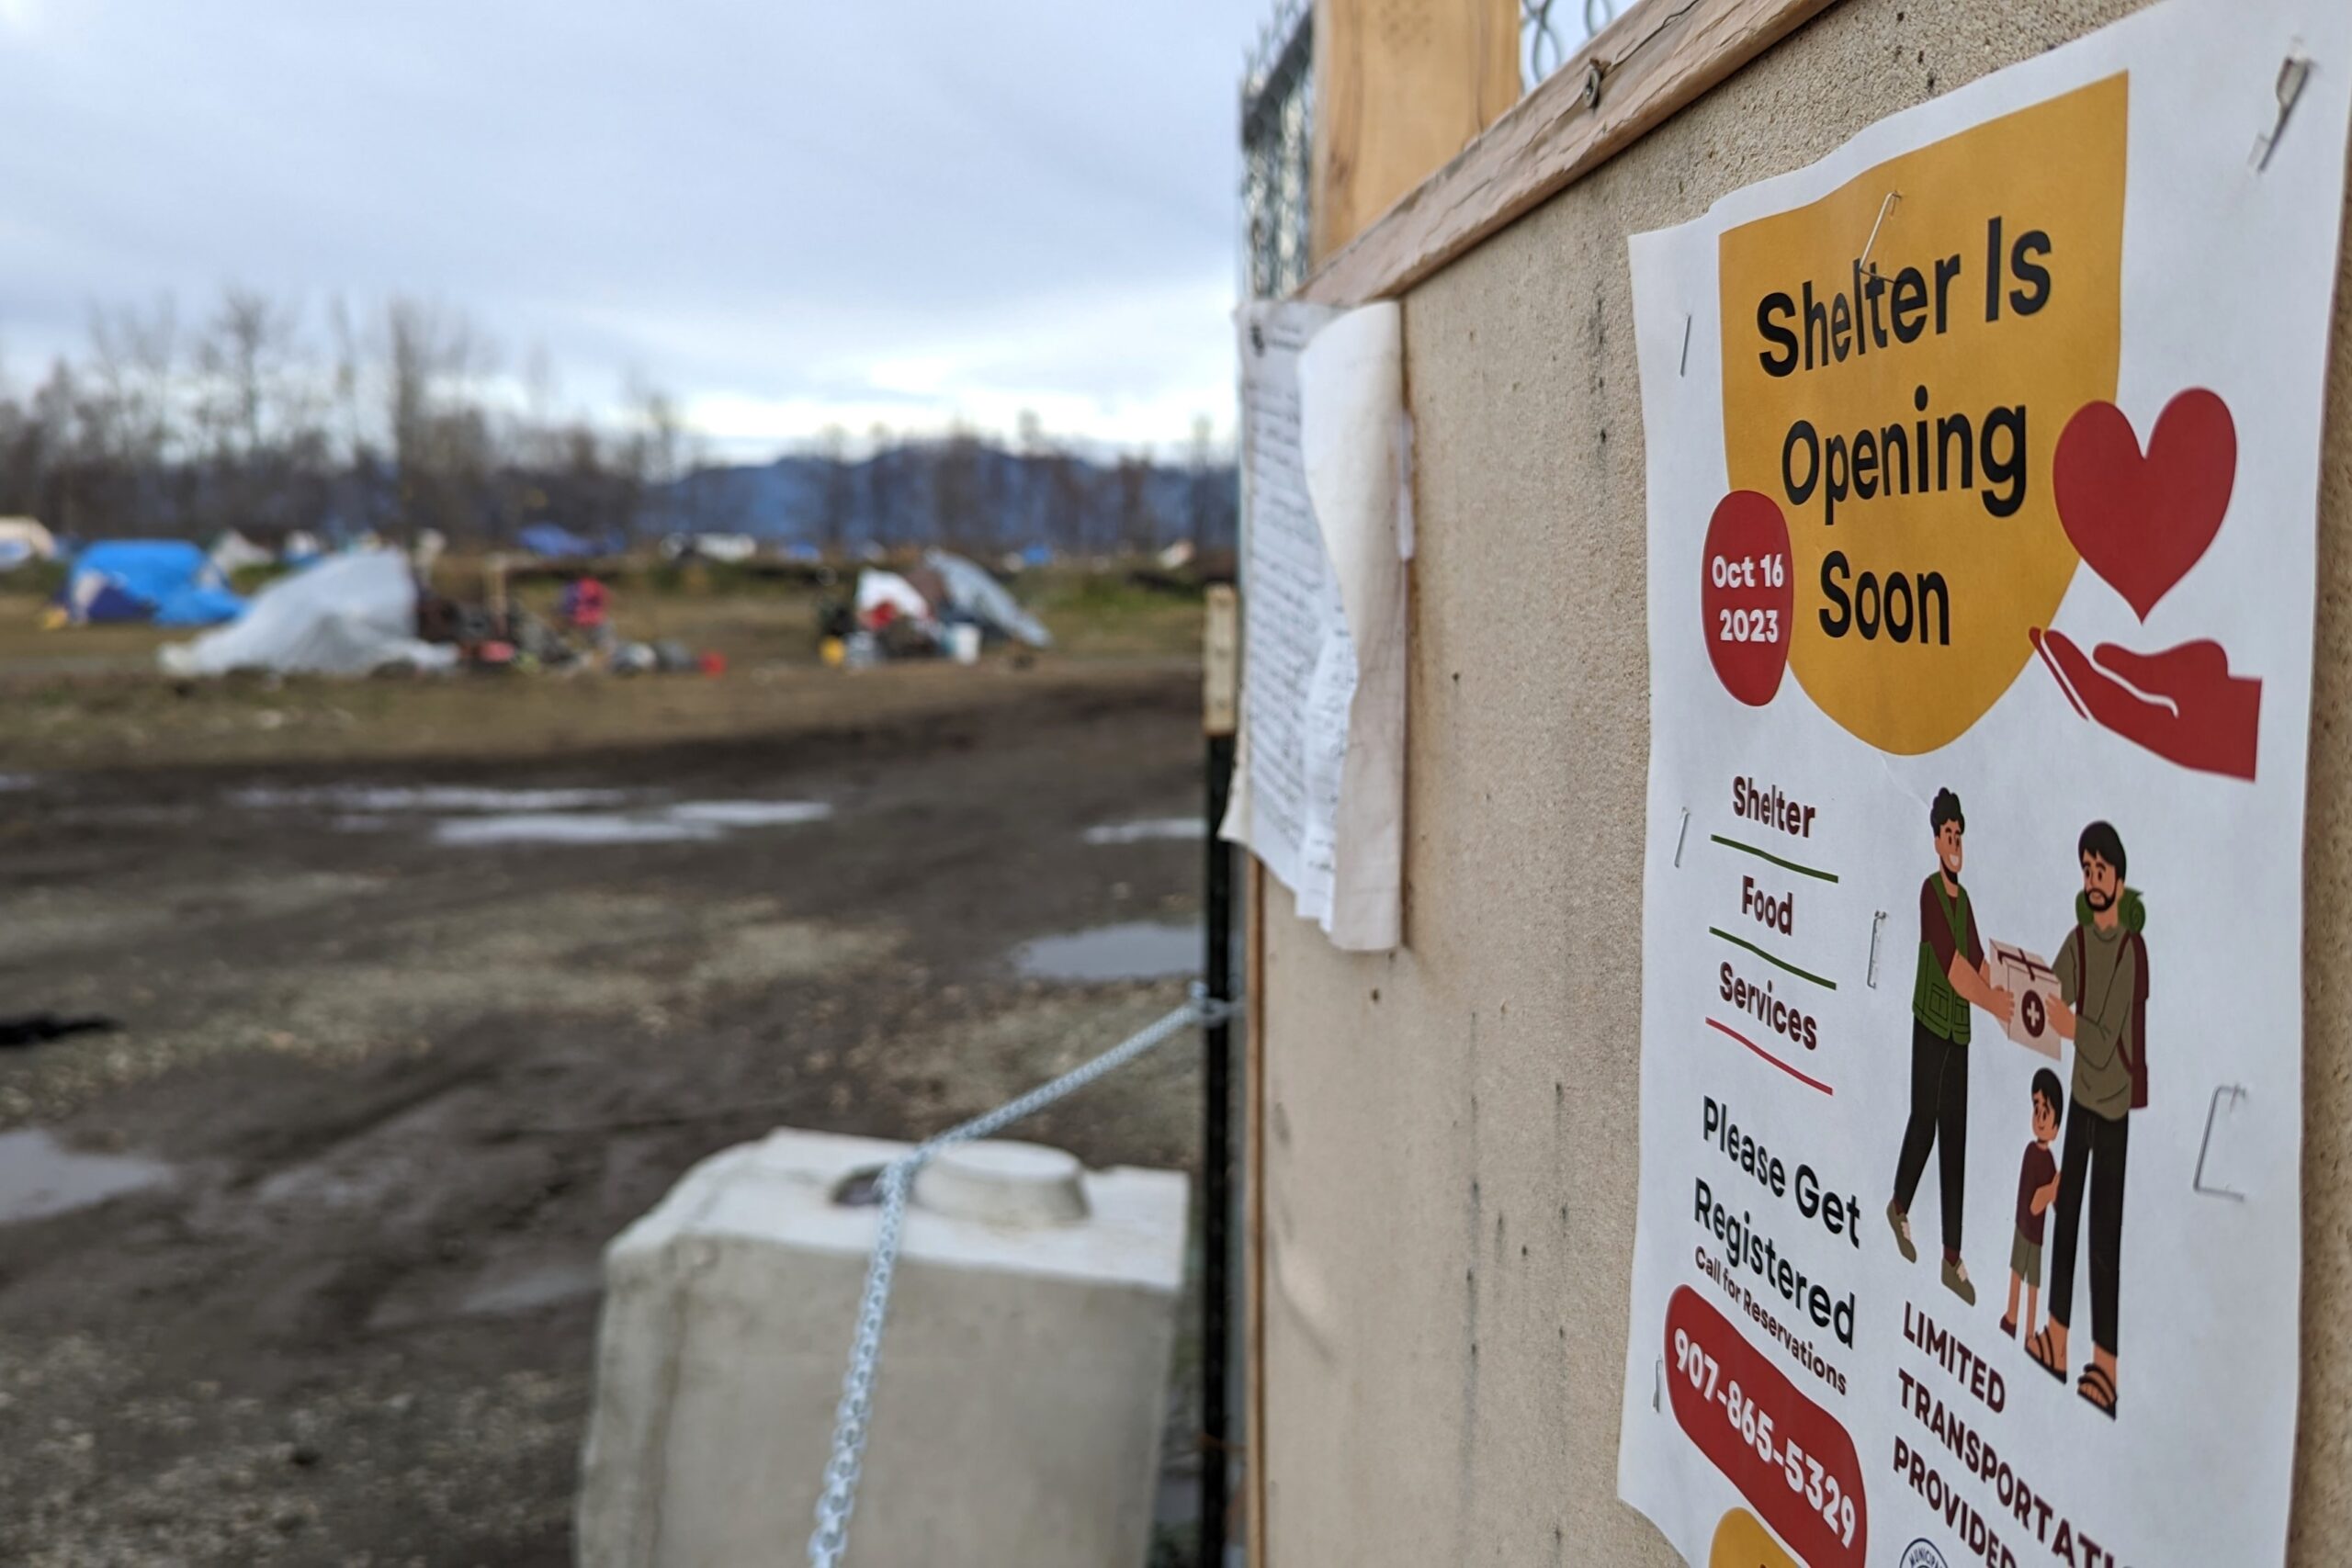 A flyer at an unofficial campground says "Shelter is opening soon"